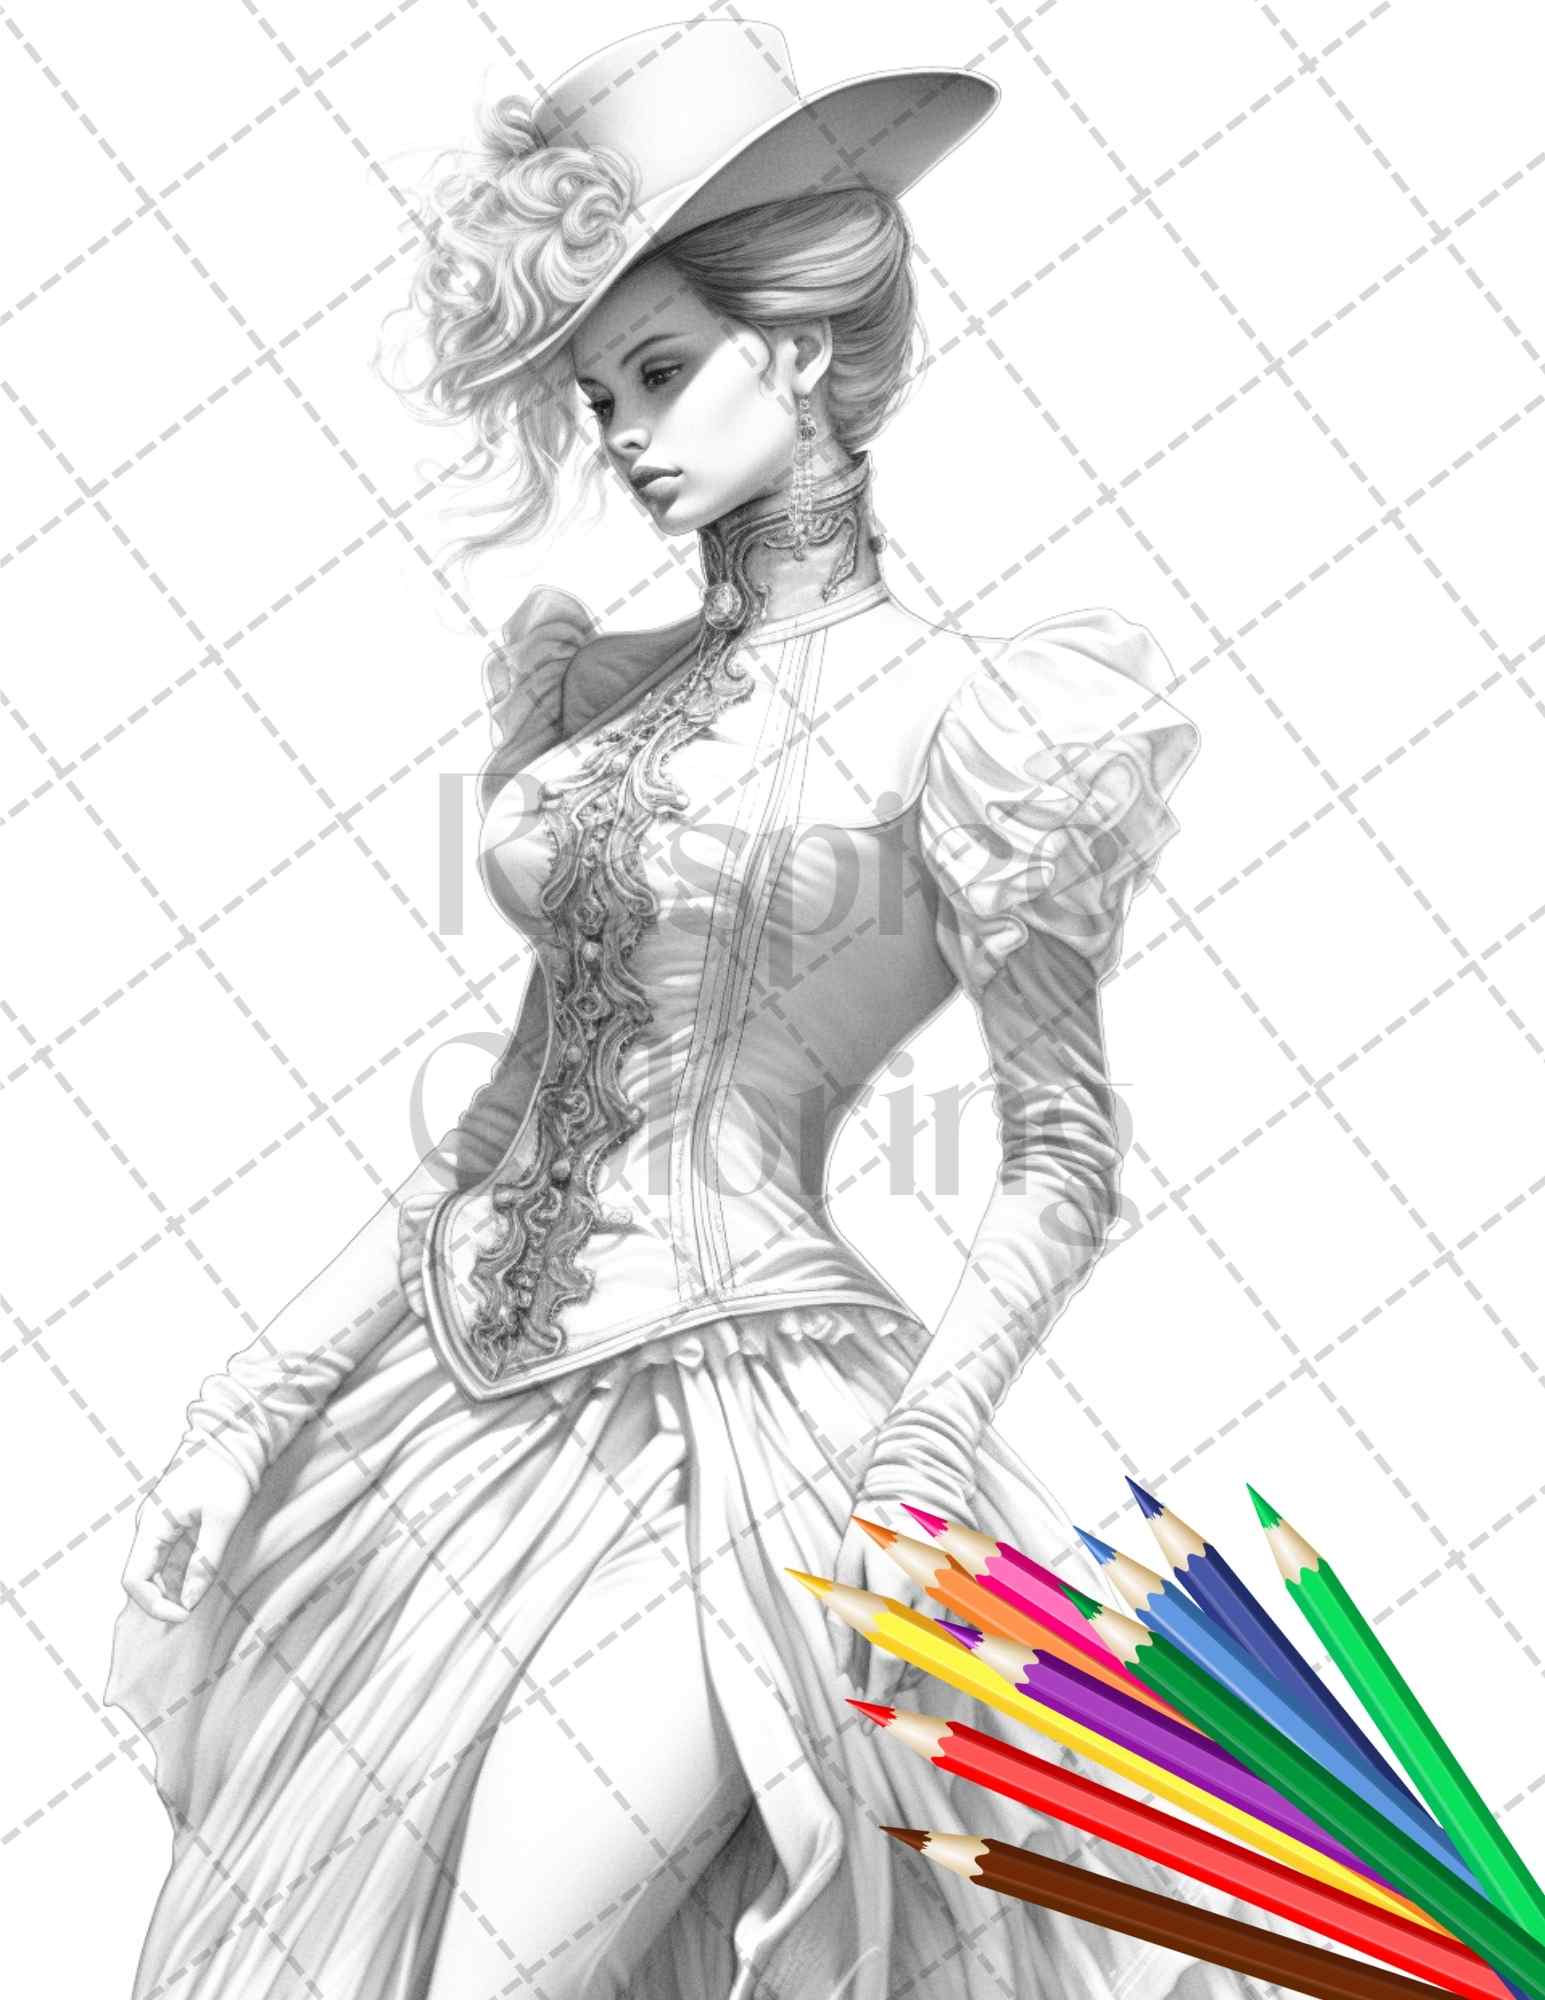 Victorian fashion grayscale coloring pages, printable grayscale coloring sheets, grayscale illustrations for adults, vintage fashion coloring, detailed grayscale artwork